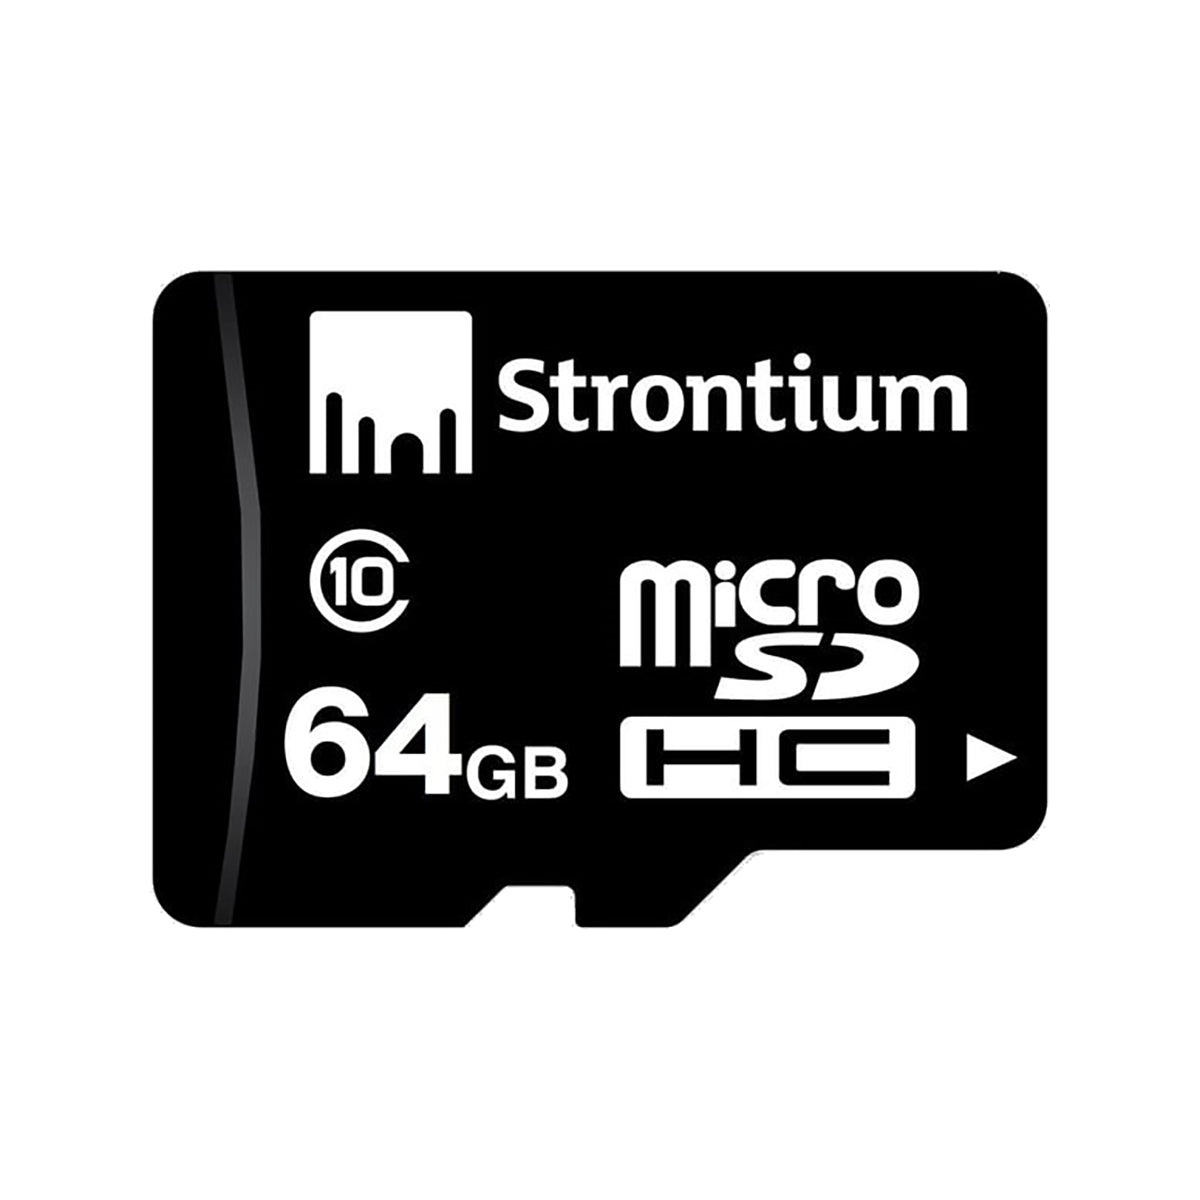 Strontium NITRO MicroSD Card only 64GB for Smartphones/Tablets